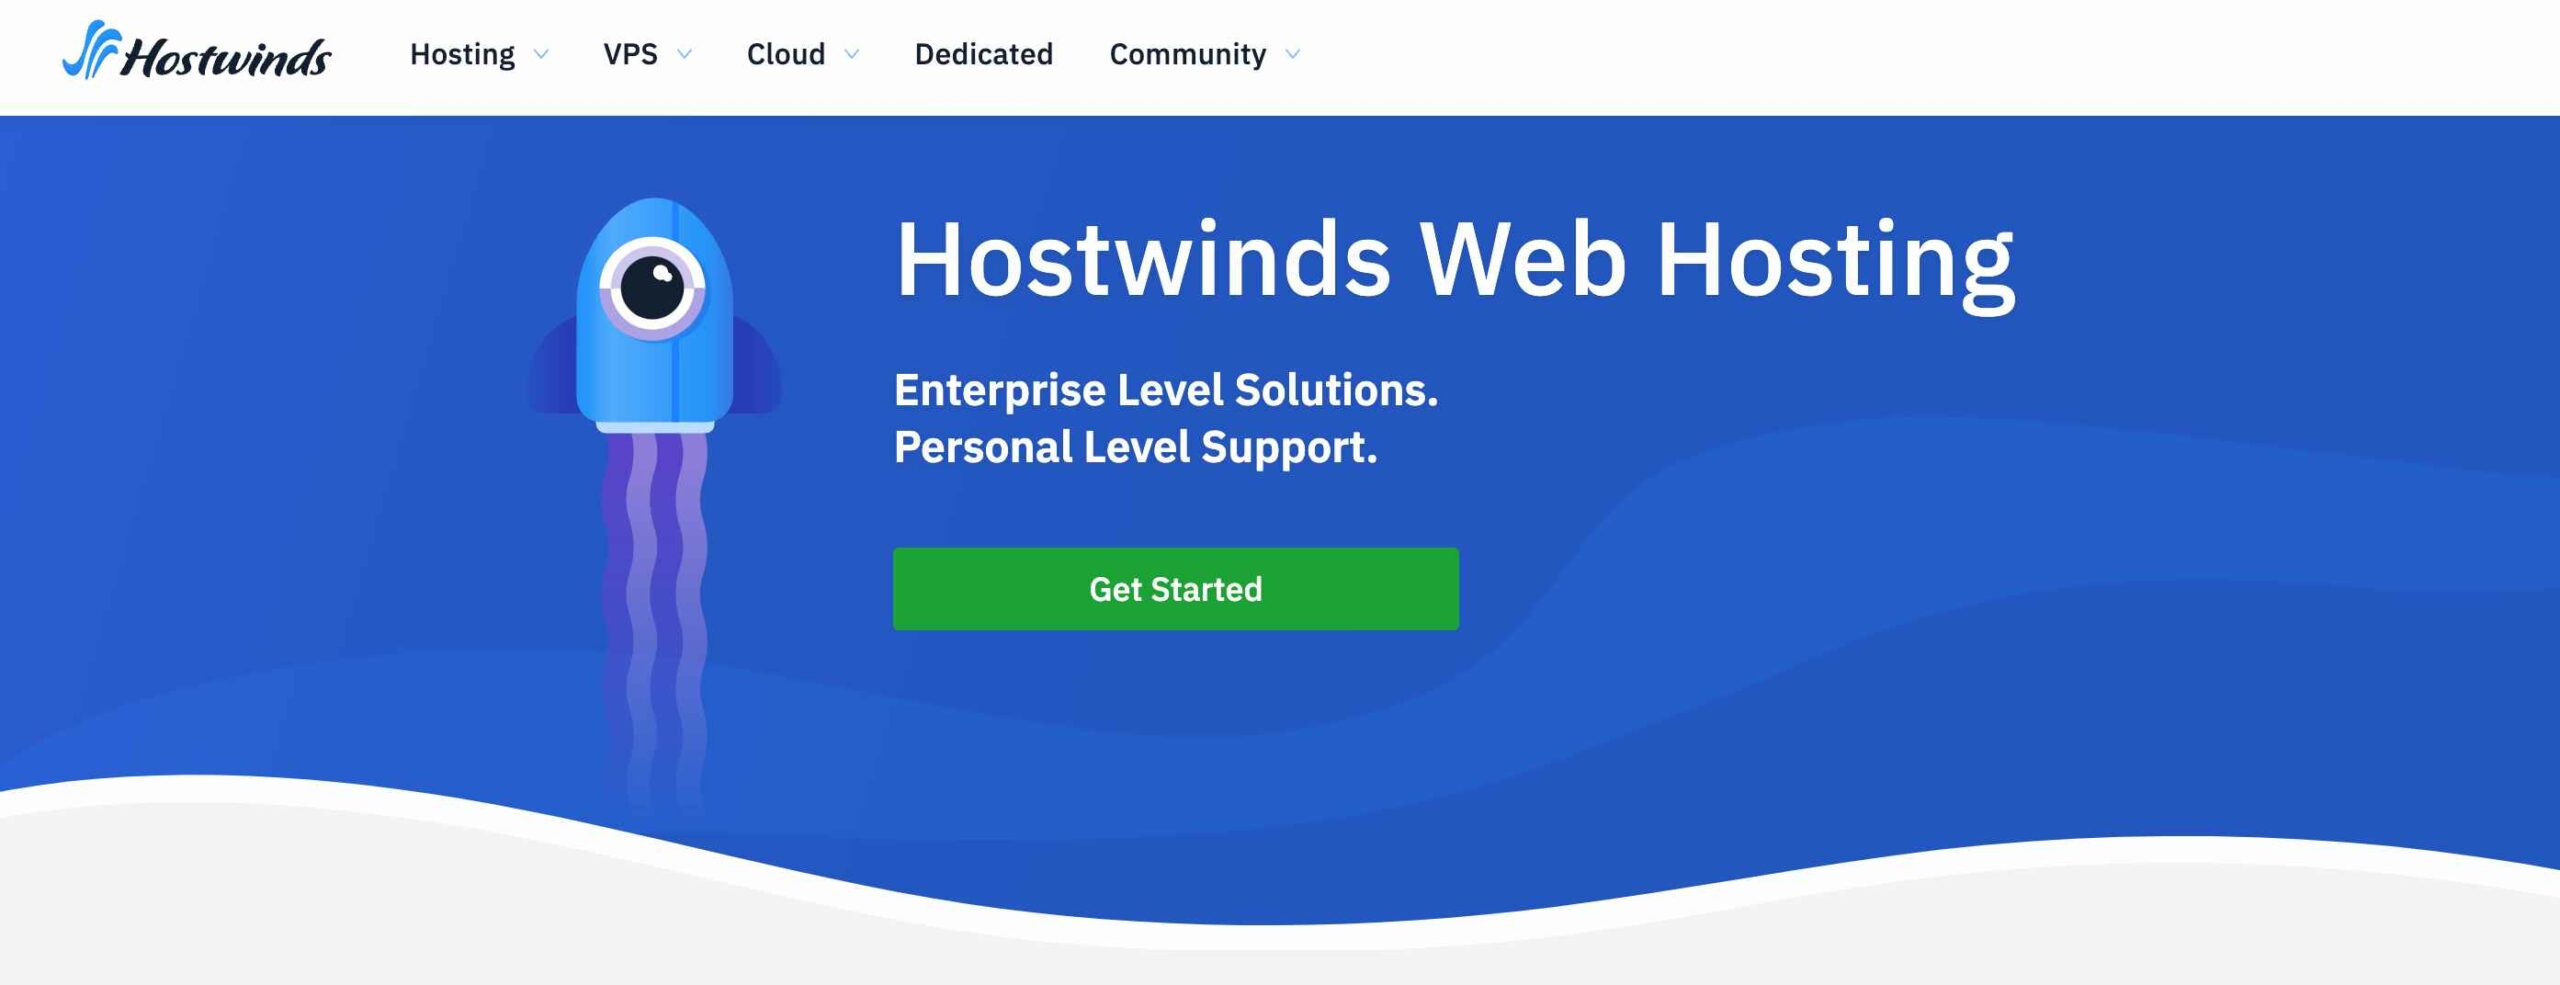 Hostwinds Overview